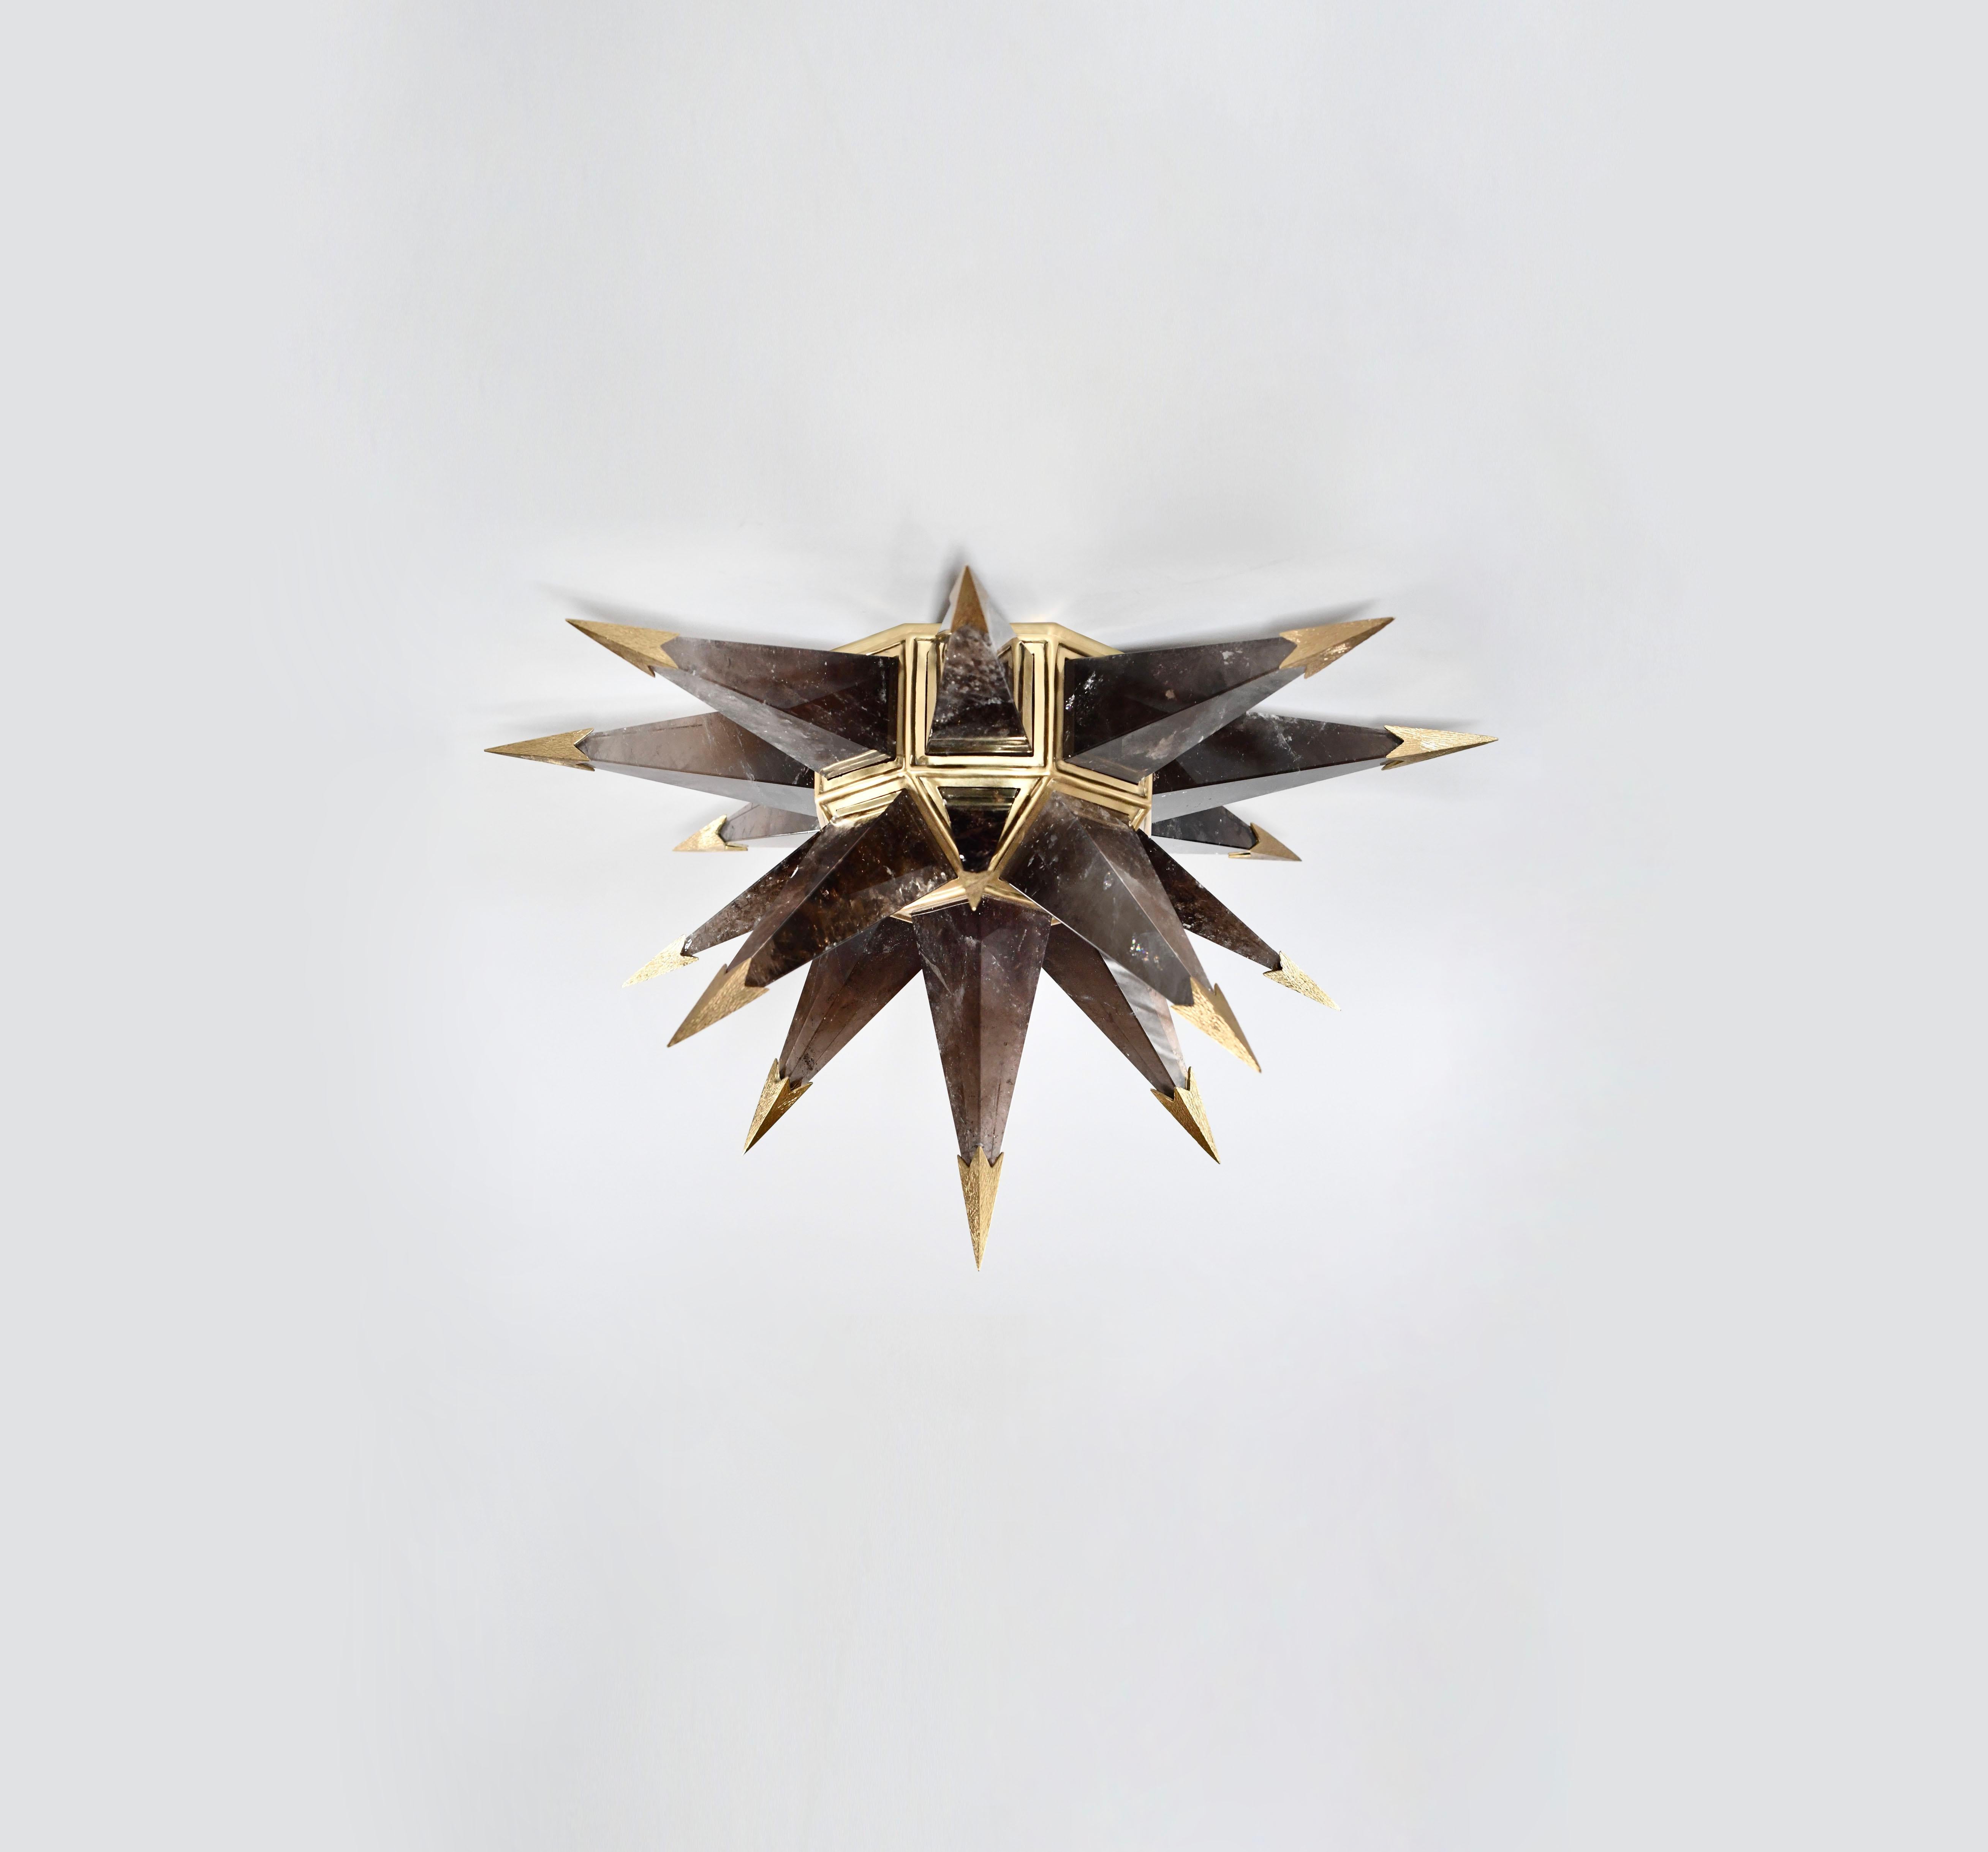 Star form smoky rock crystal flushmount with polish brass frame and tip. Created by Phoenix Gallery, NYC.